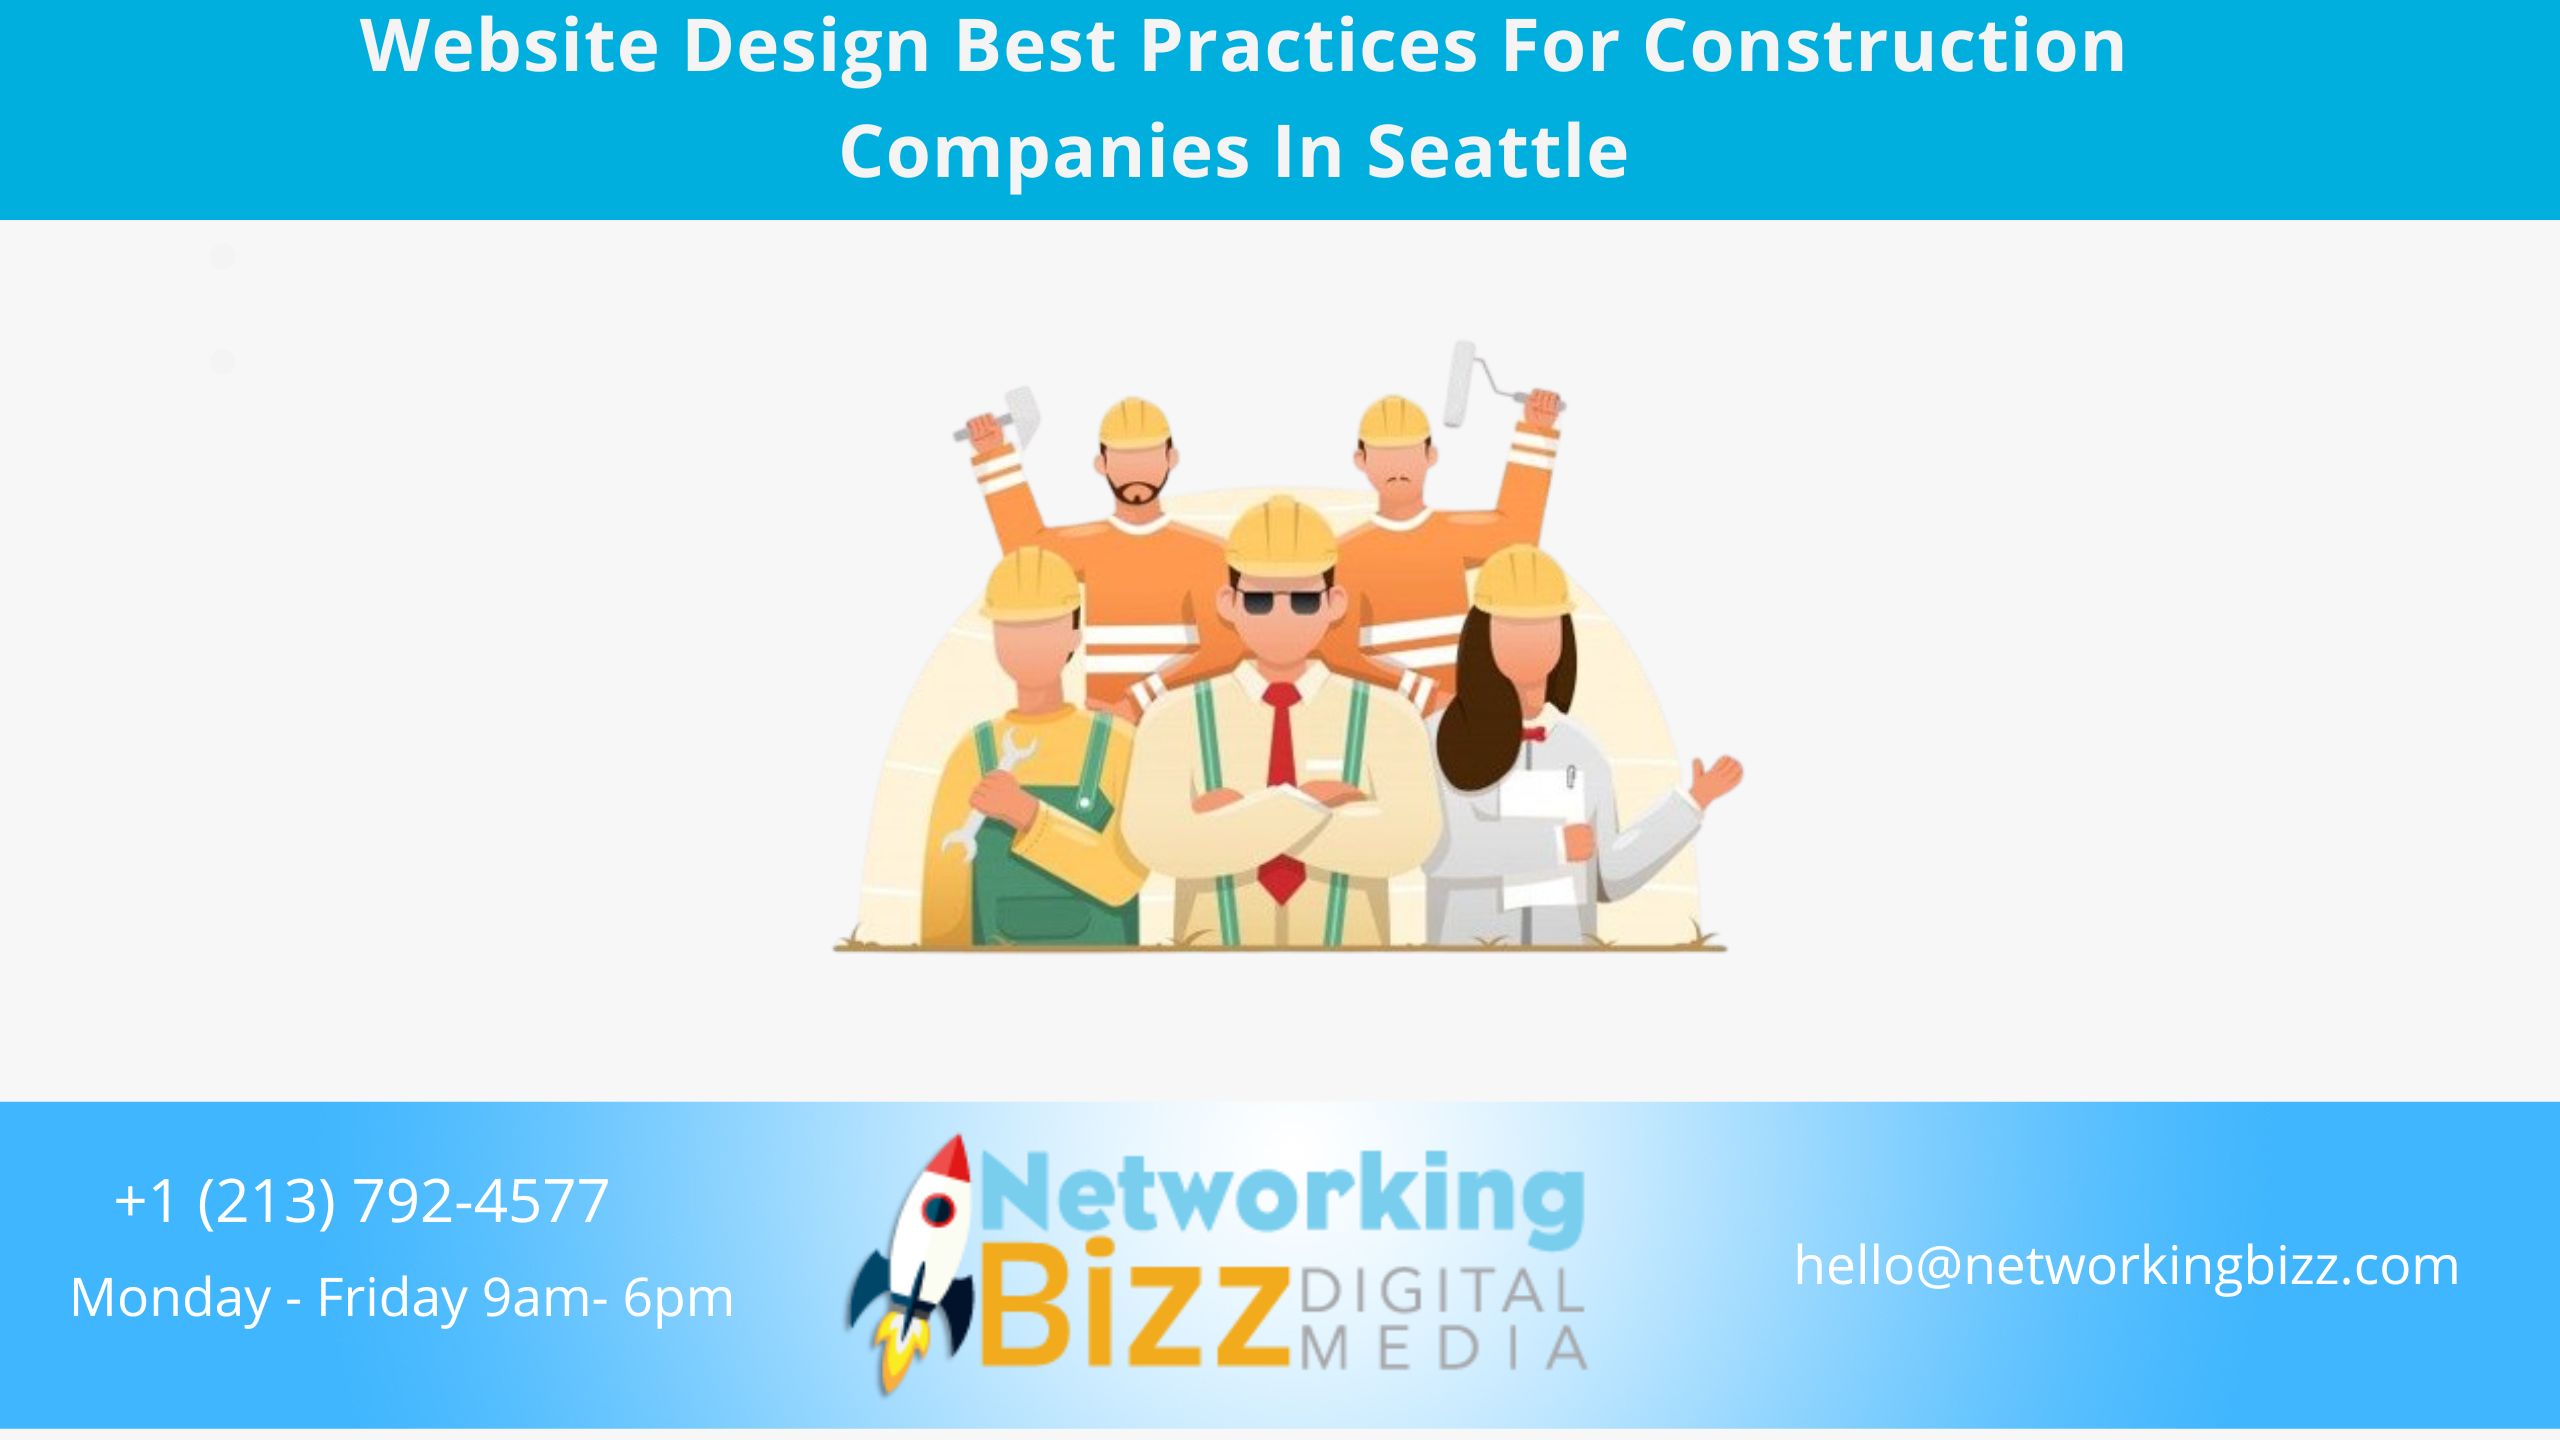 Website Design Best Practices For Construction Companies In Seattle 